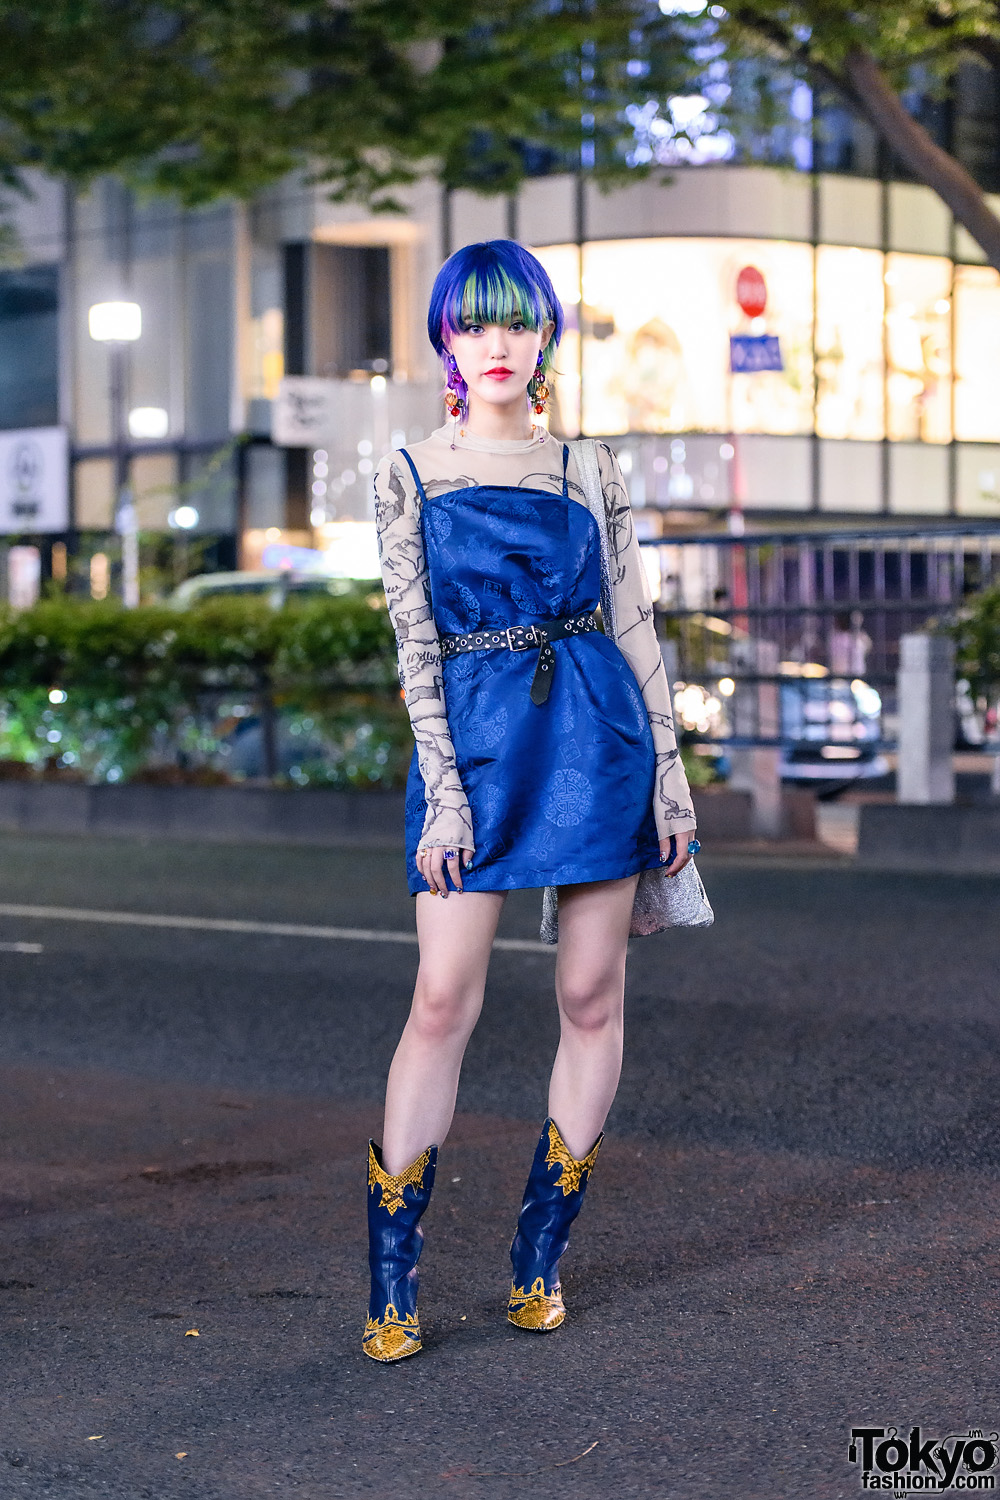 Tokyo Streetwear Style w/ Colorful Hairstyle, Vintage Bead 